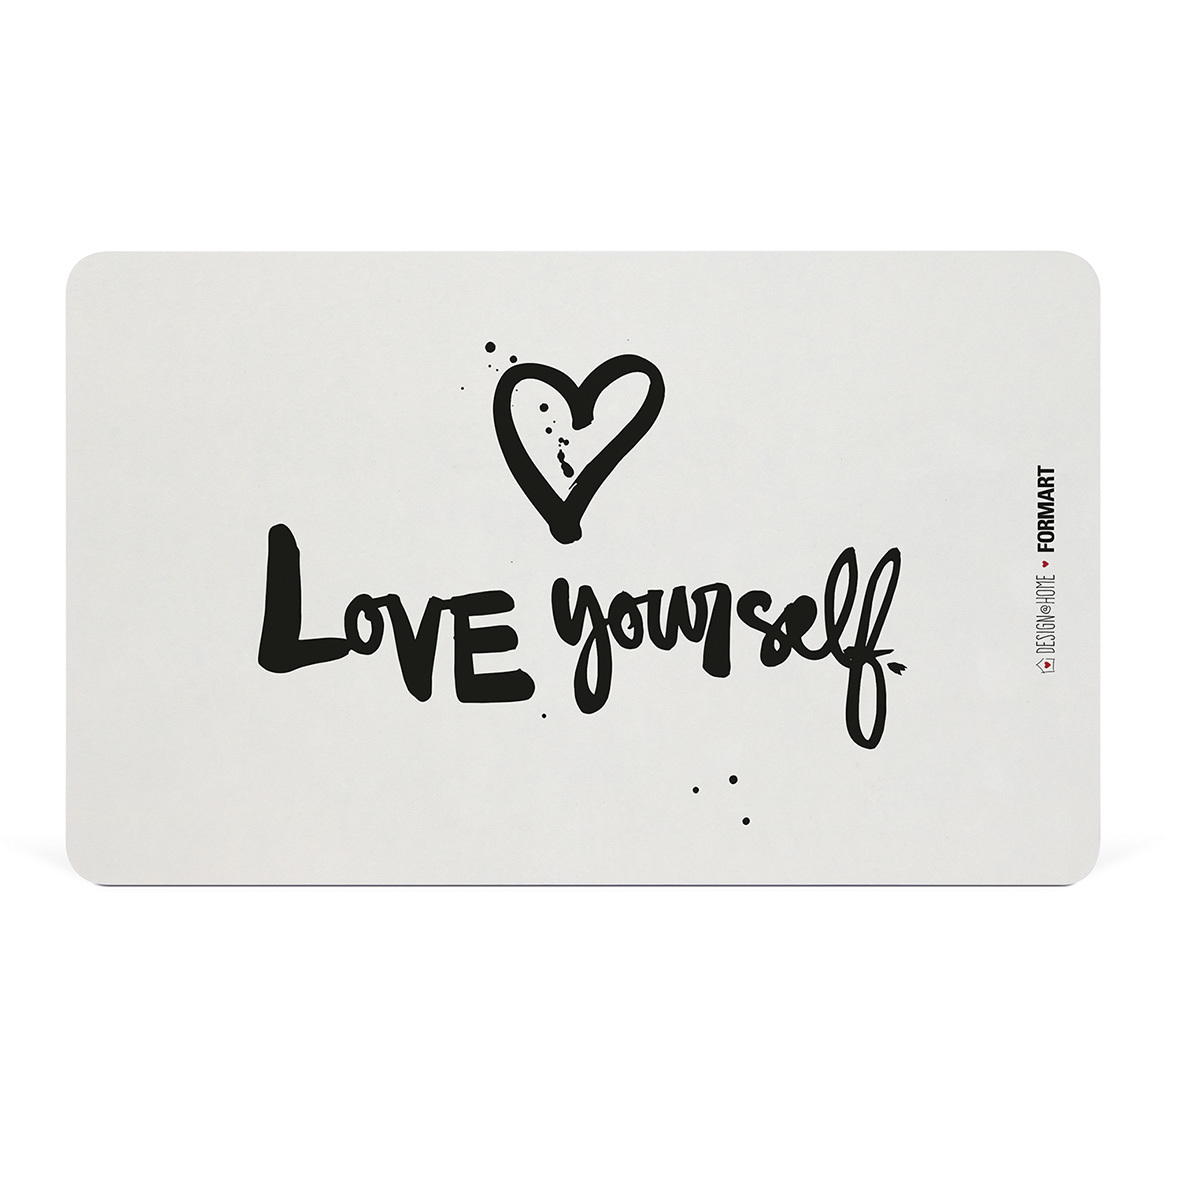 Love yourself Tray D@H